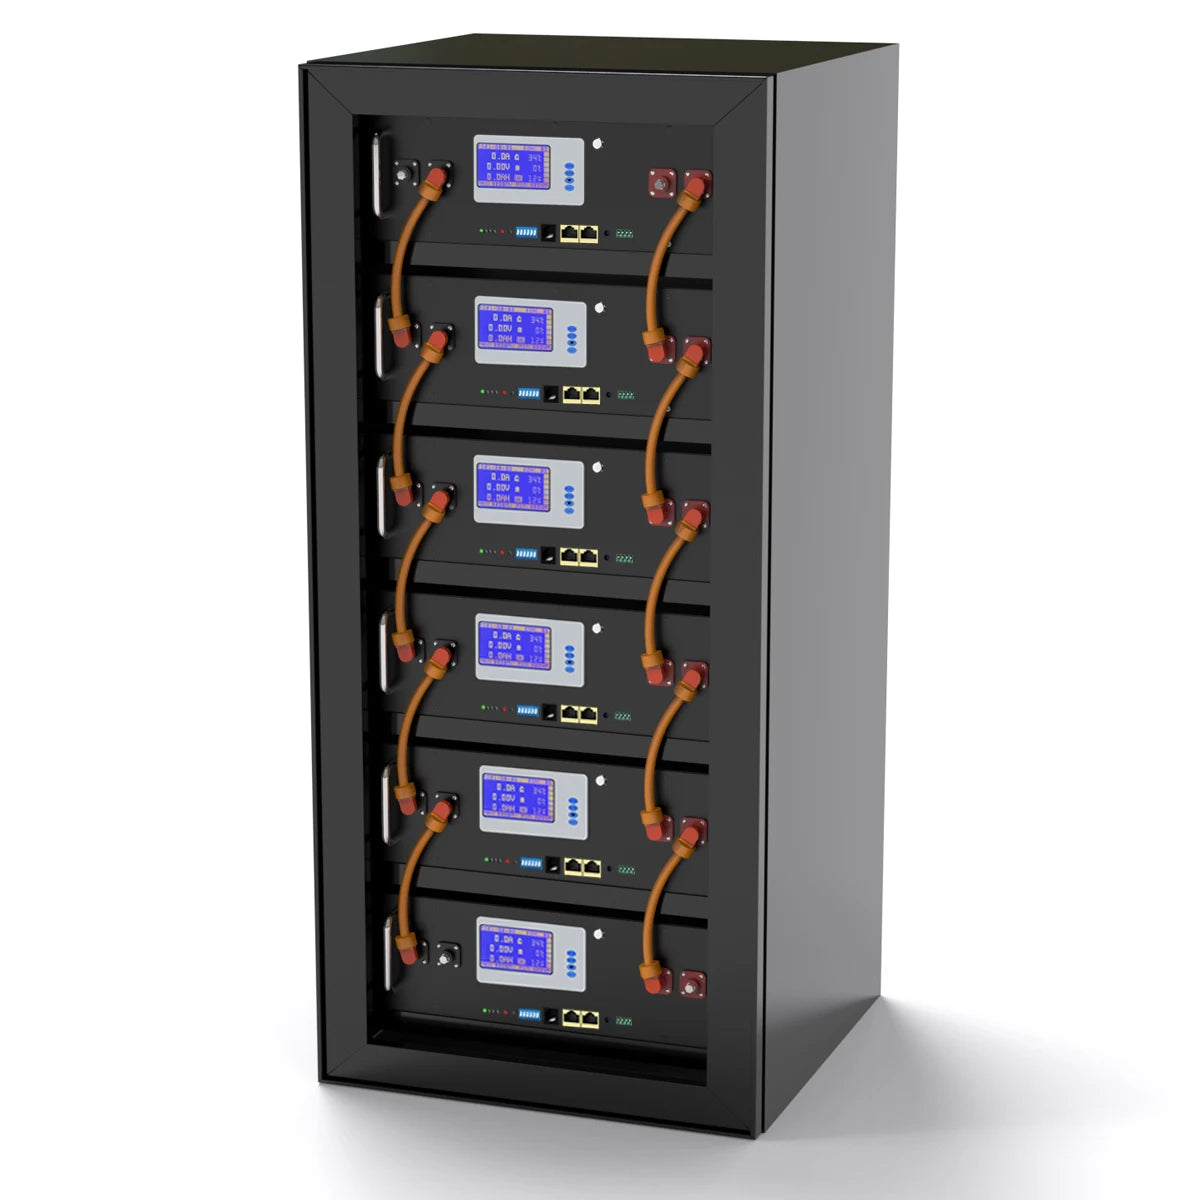 LiFePO4 24V 5KW Battery, CERRNSS battery features: continuous current, pulse current, discharge cut-off voltage, water resistance, and LCD display.